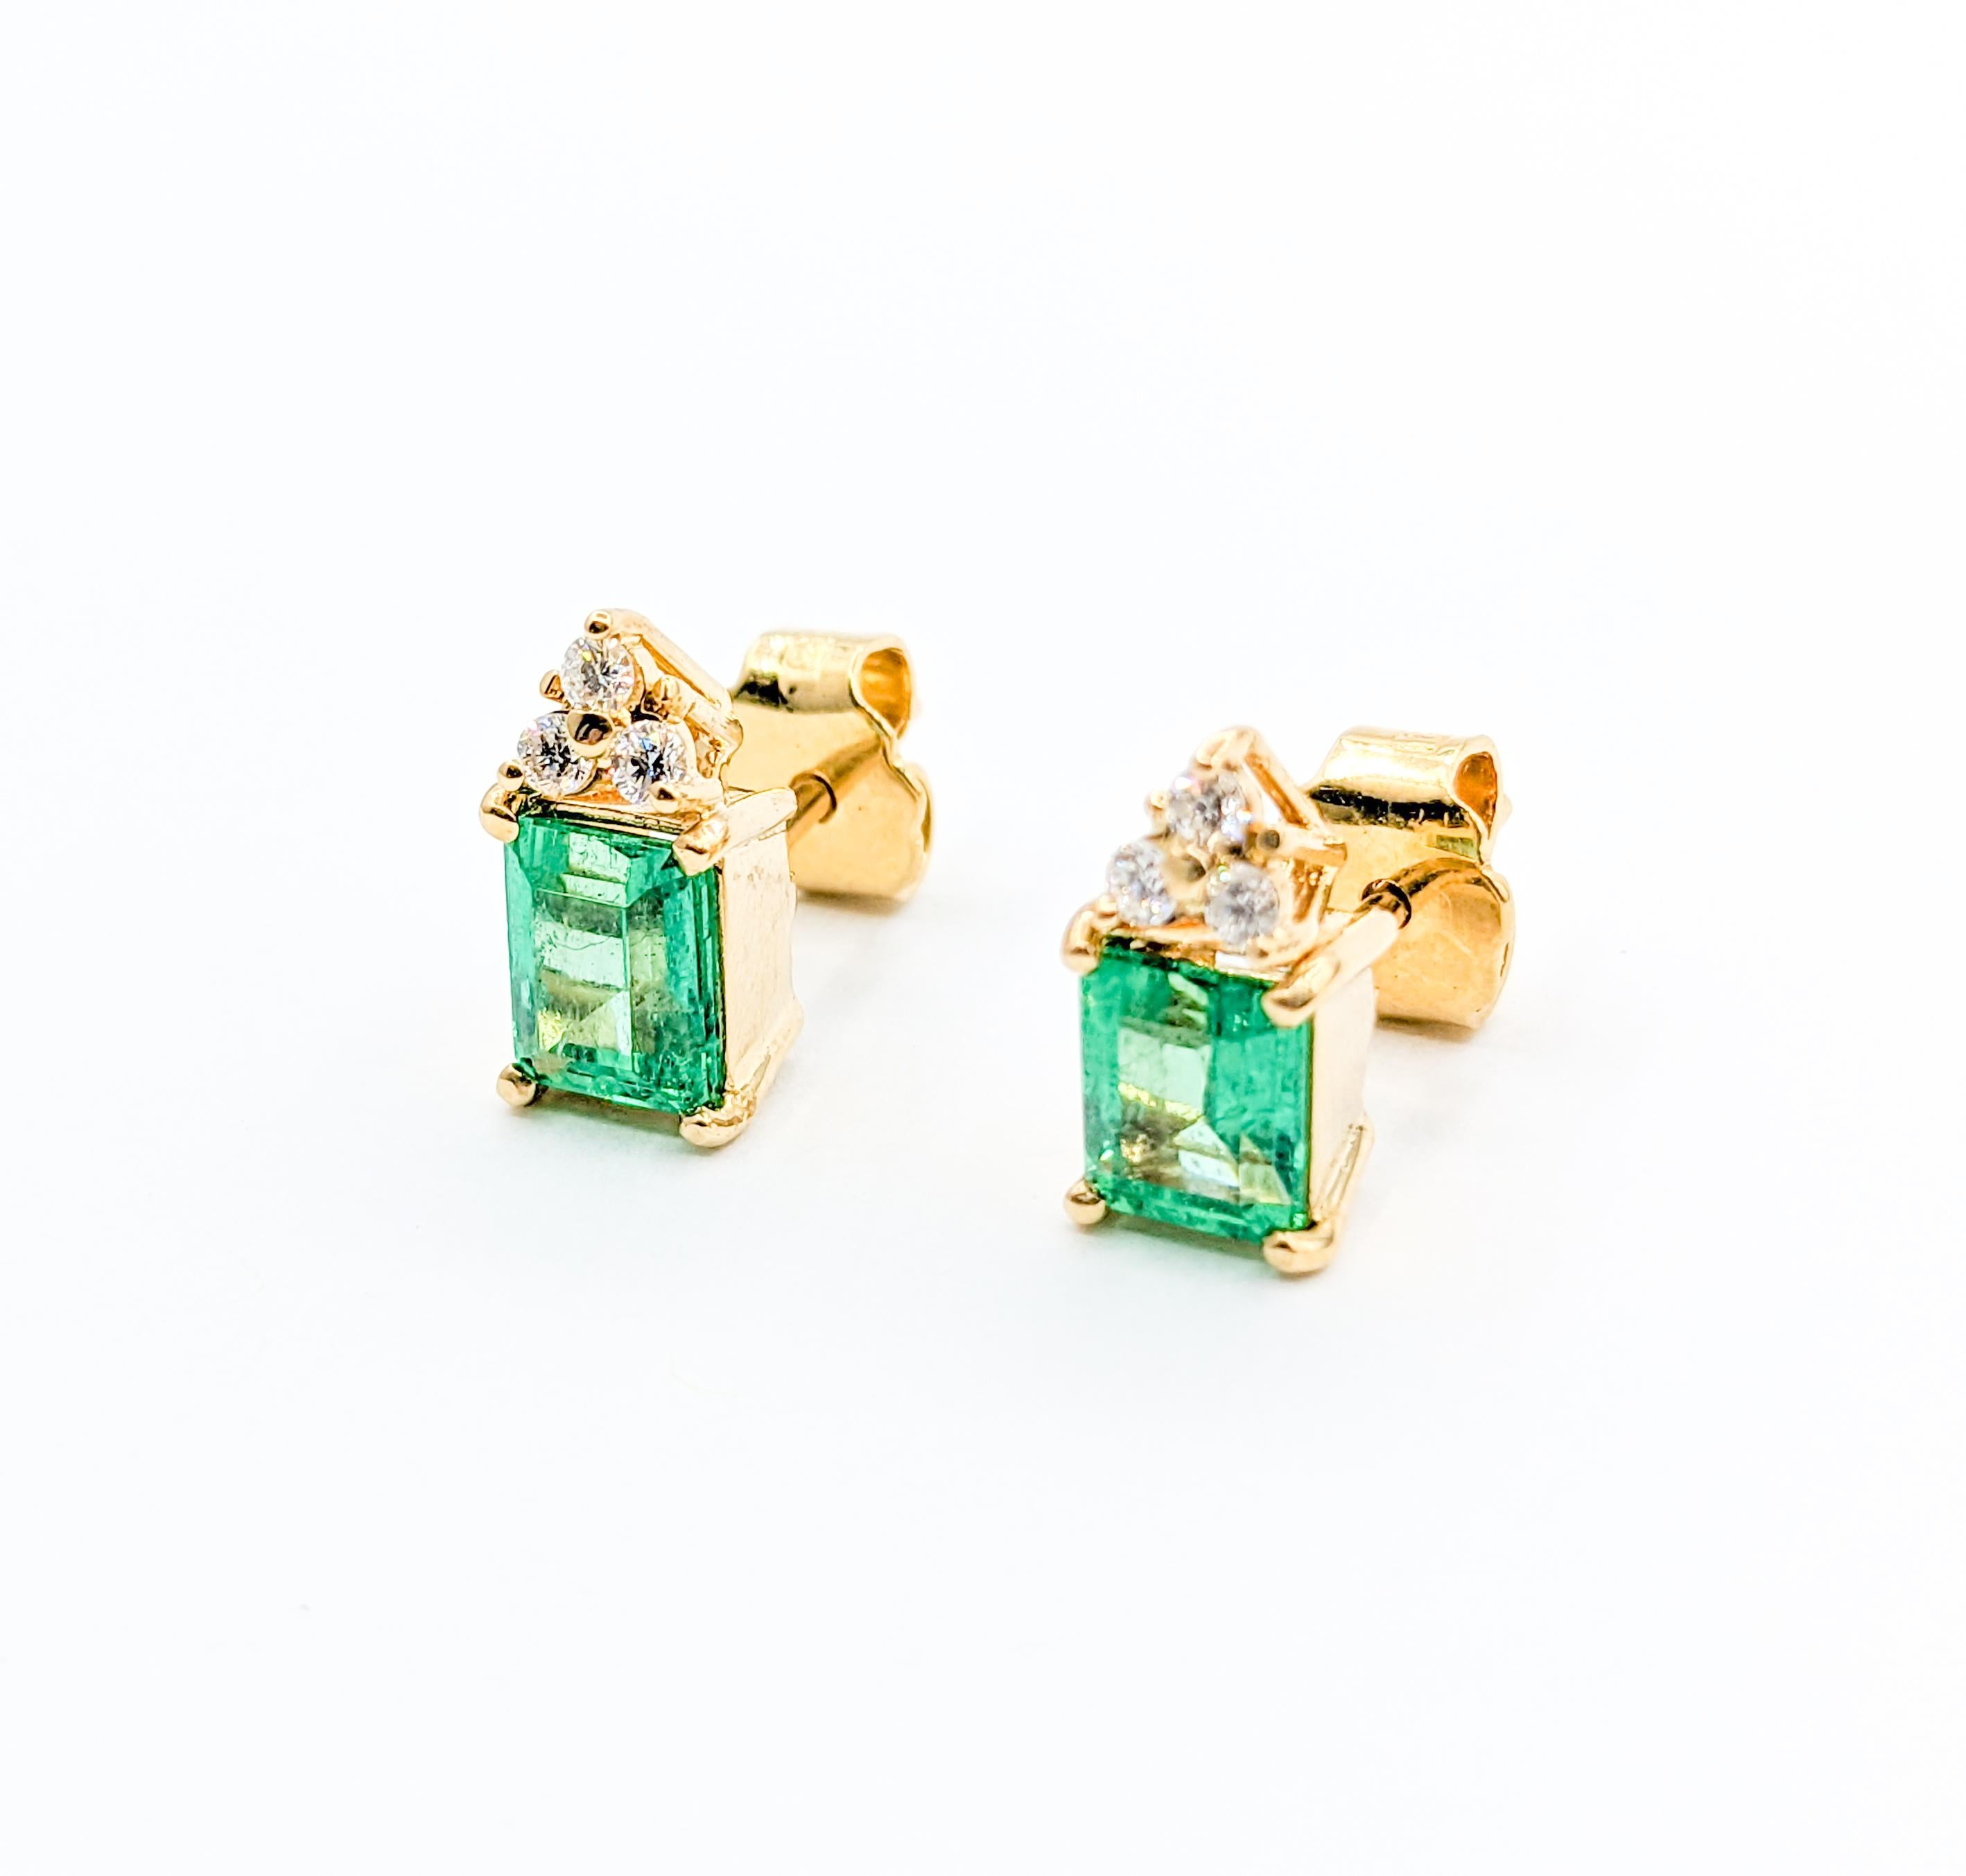 Stunning Colombian Emerald & Diamond Stud Earrings with GIA Report

Introducing these exquisite Columbian emerald stud earrings, meticulously crafted in 18k Yellow Gold. These earrings showcase 1.59 carats of mesmerizing green Emeralds, both of